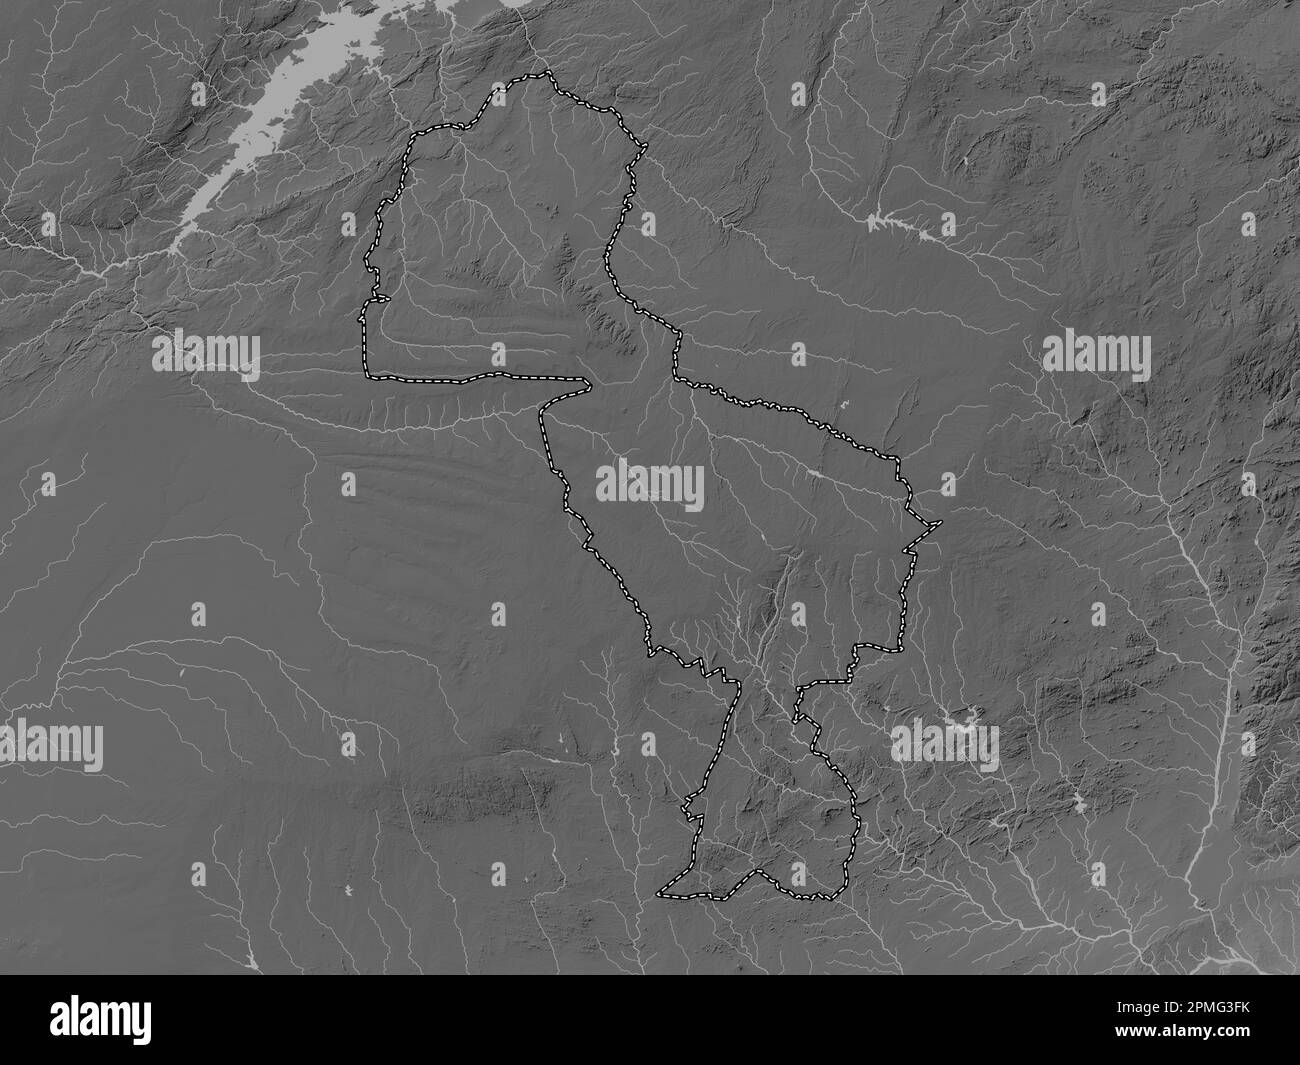 Midlands, province of Zimbabwe. Grayscale elevation map with lakes and rivers Stock Photo